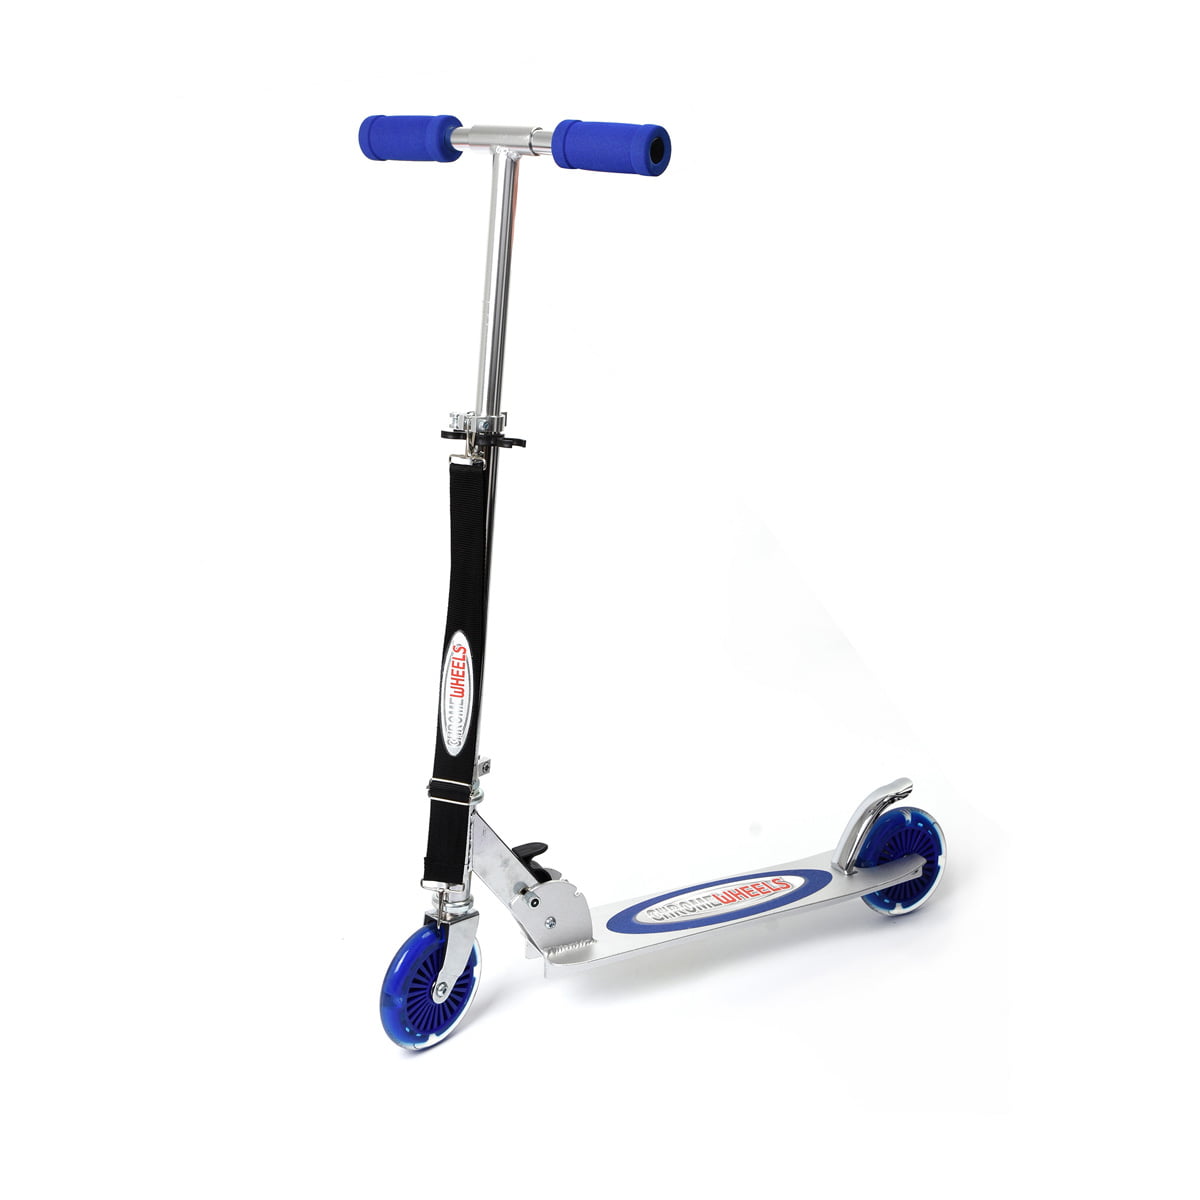 ChromeWheels Kick Scooter Best Gift for Age 6 up Kids Girls Boys Teens 200lb Weight Limit Deluxe 8 Large 2 Light Up Wheels Wide Deck 5 Adjustable Height with Kickstand Foldable Scooters 